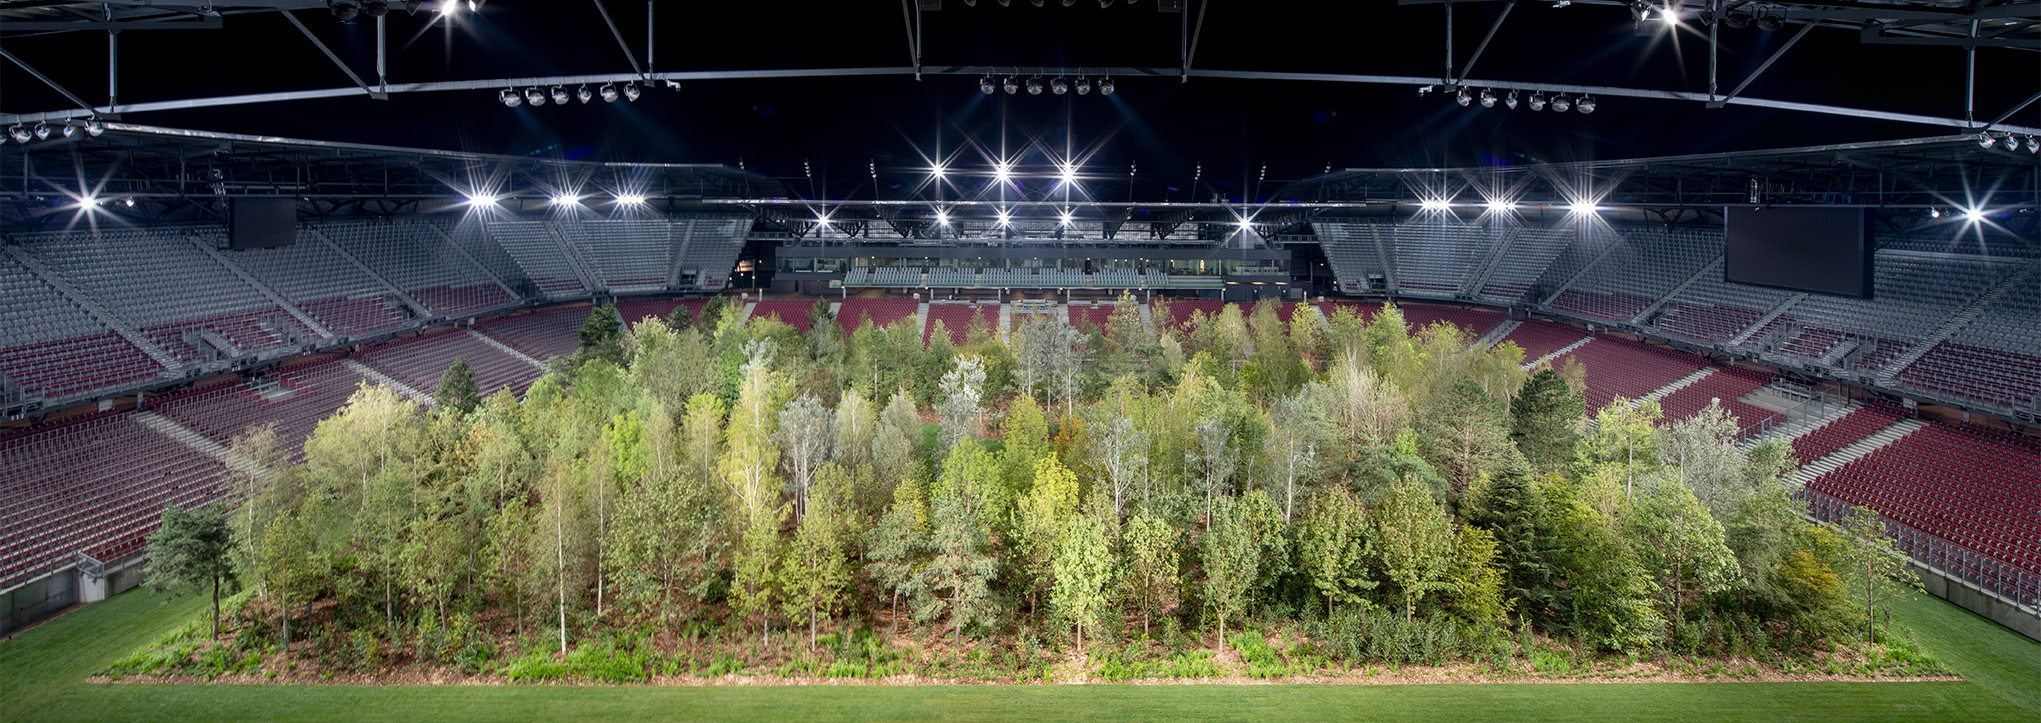 Visual of There are 299 trees growing in a football stadium